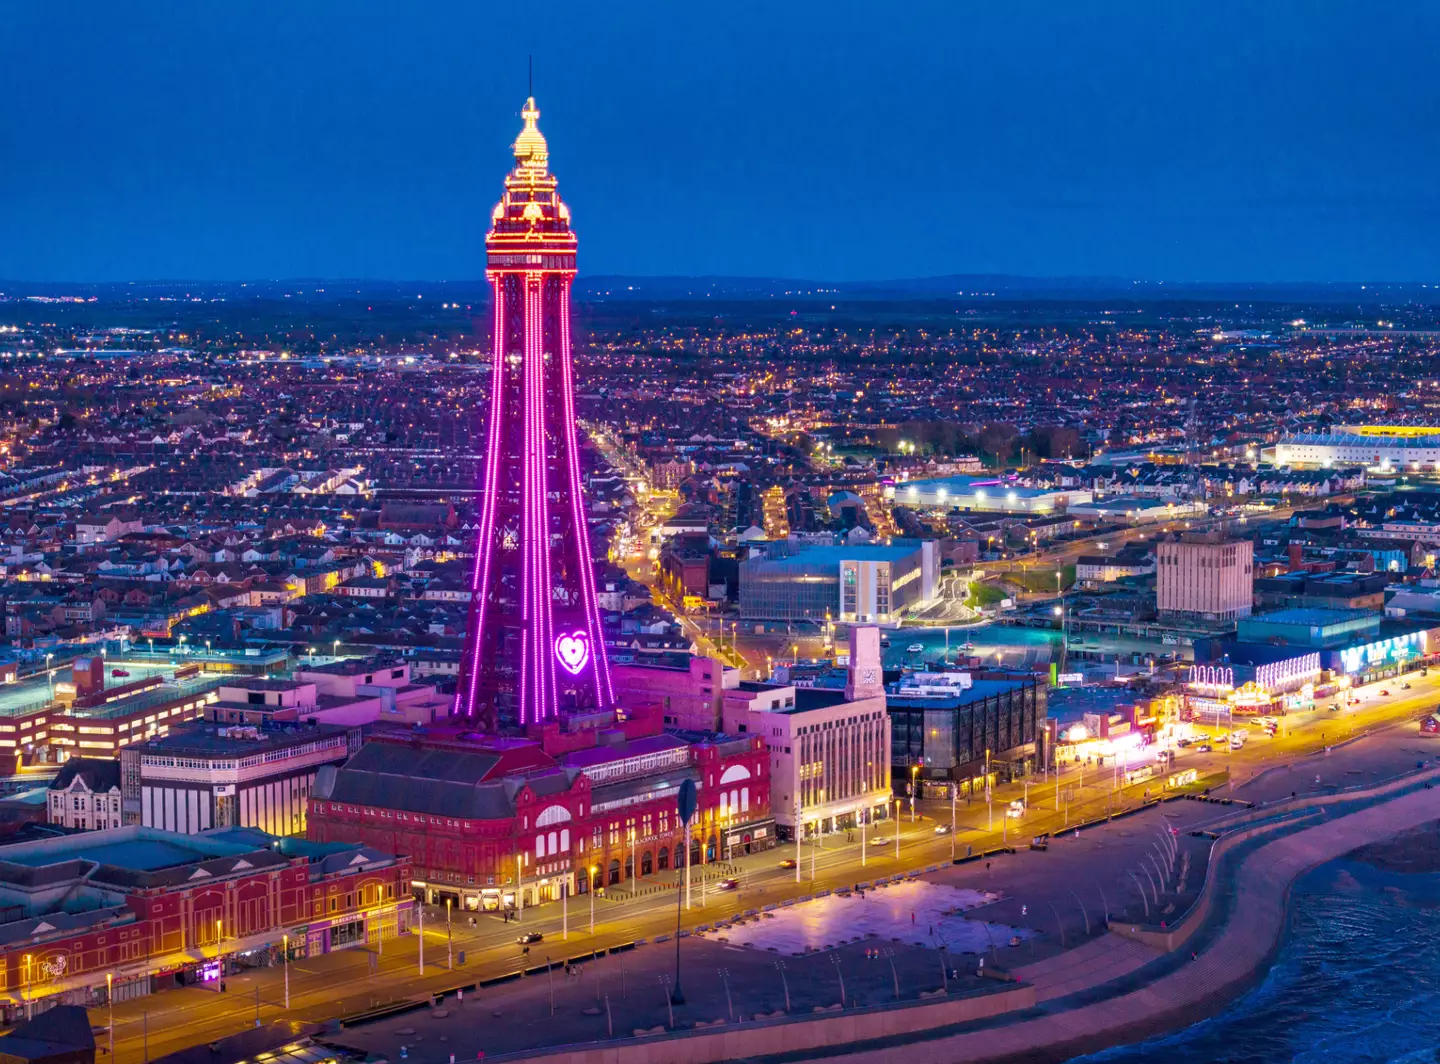 The accident took place at Blackpool Tower. (Christopher Furlong/Getty Images)